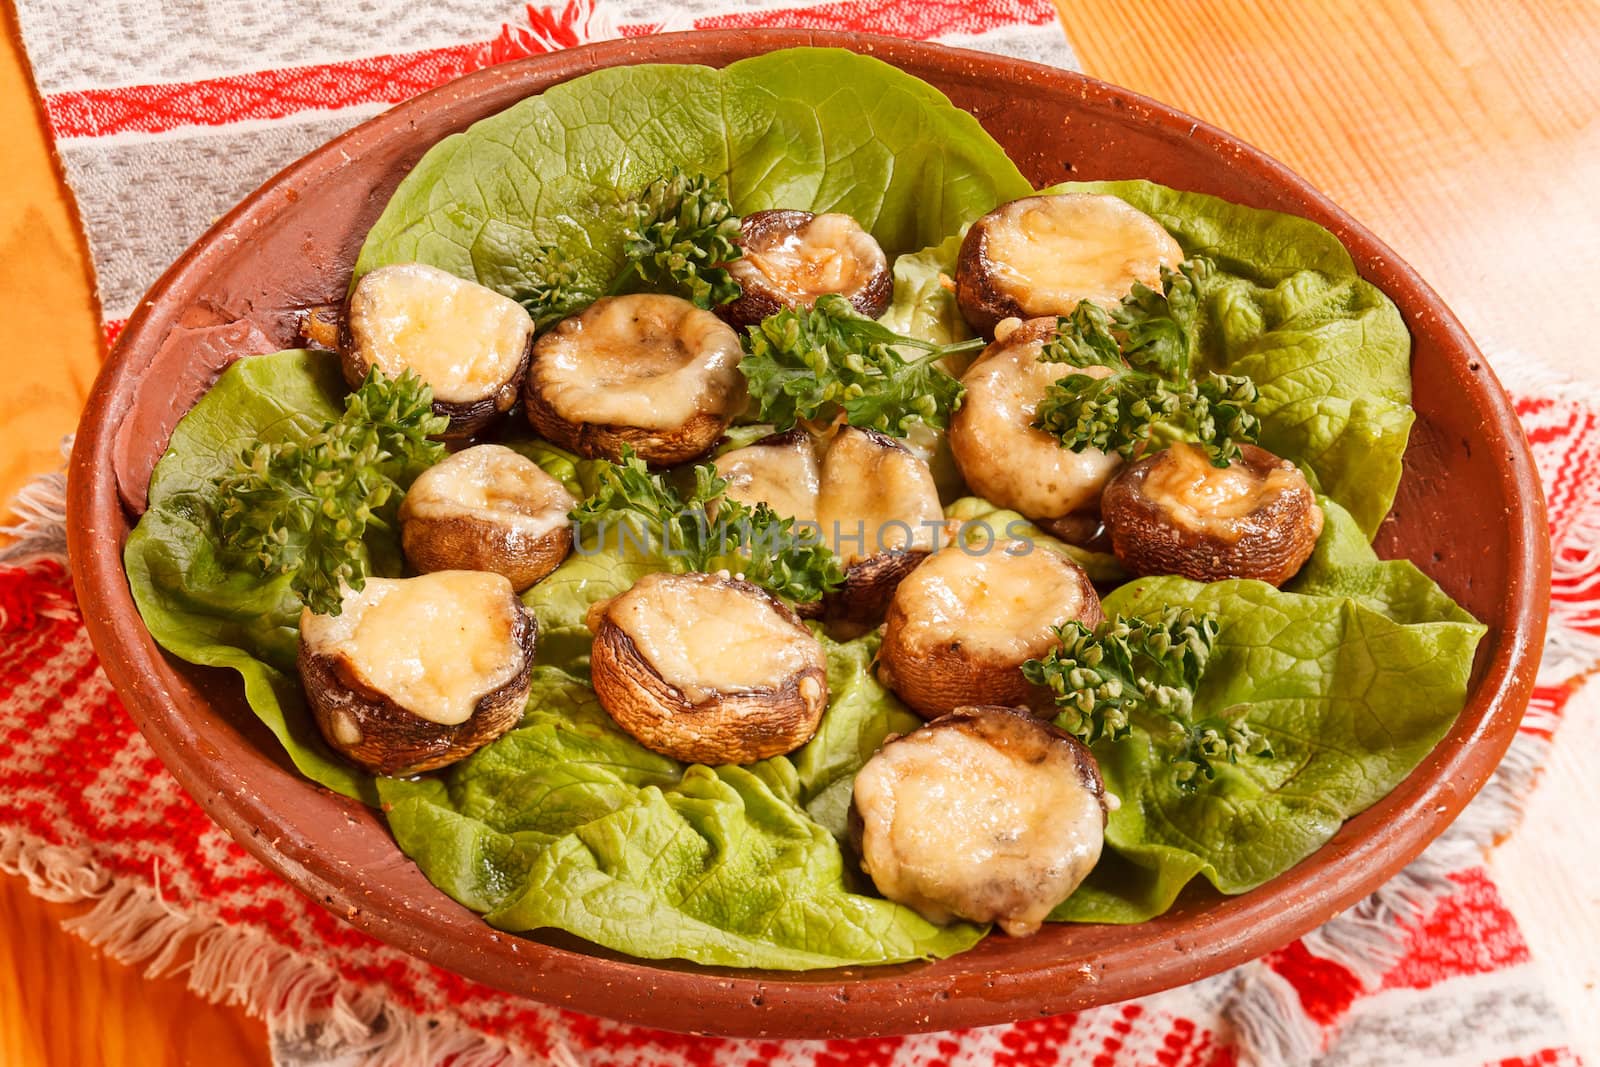 stuffed mushrooms with meat and cheese by shebeko